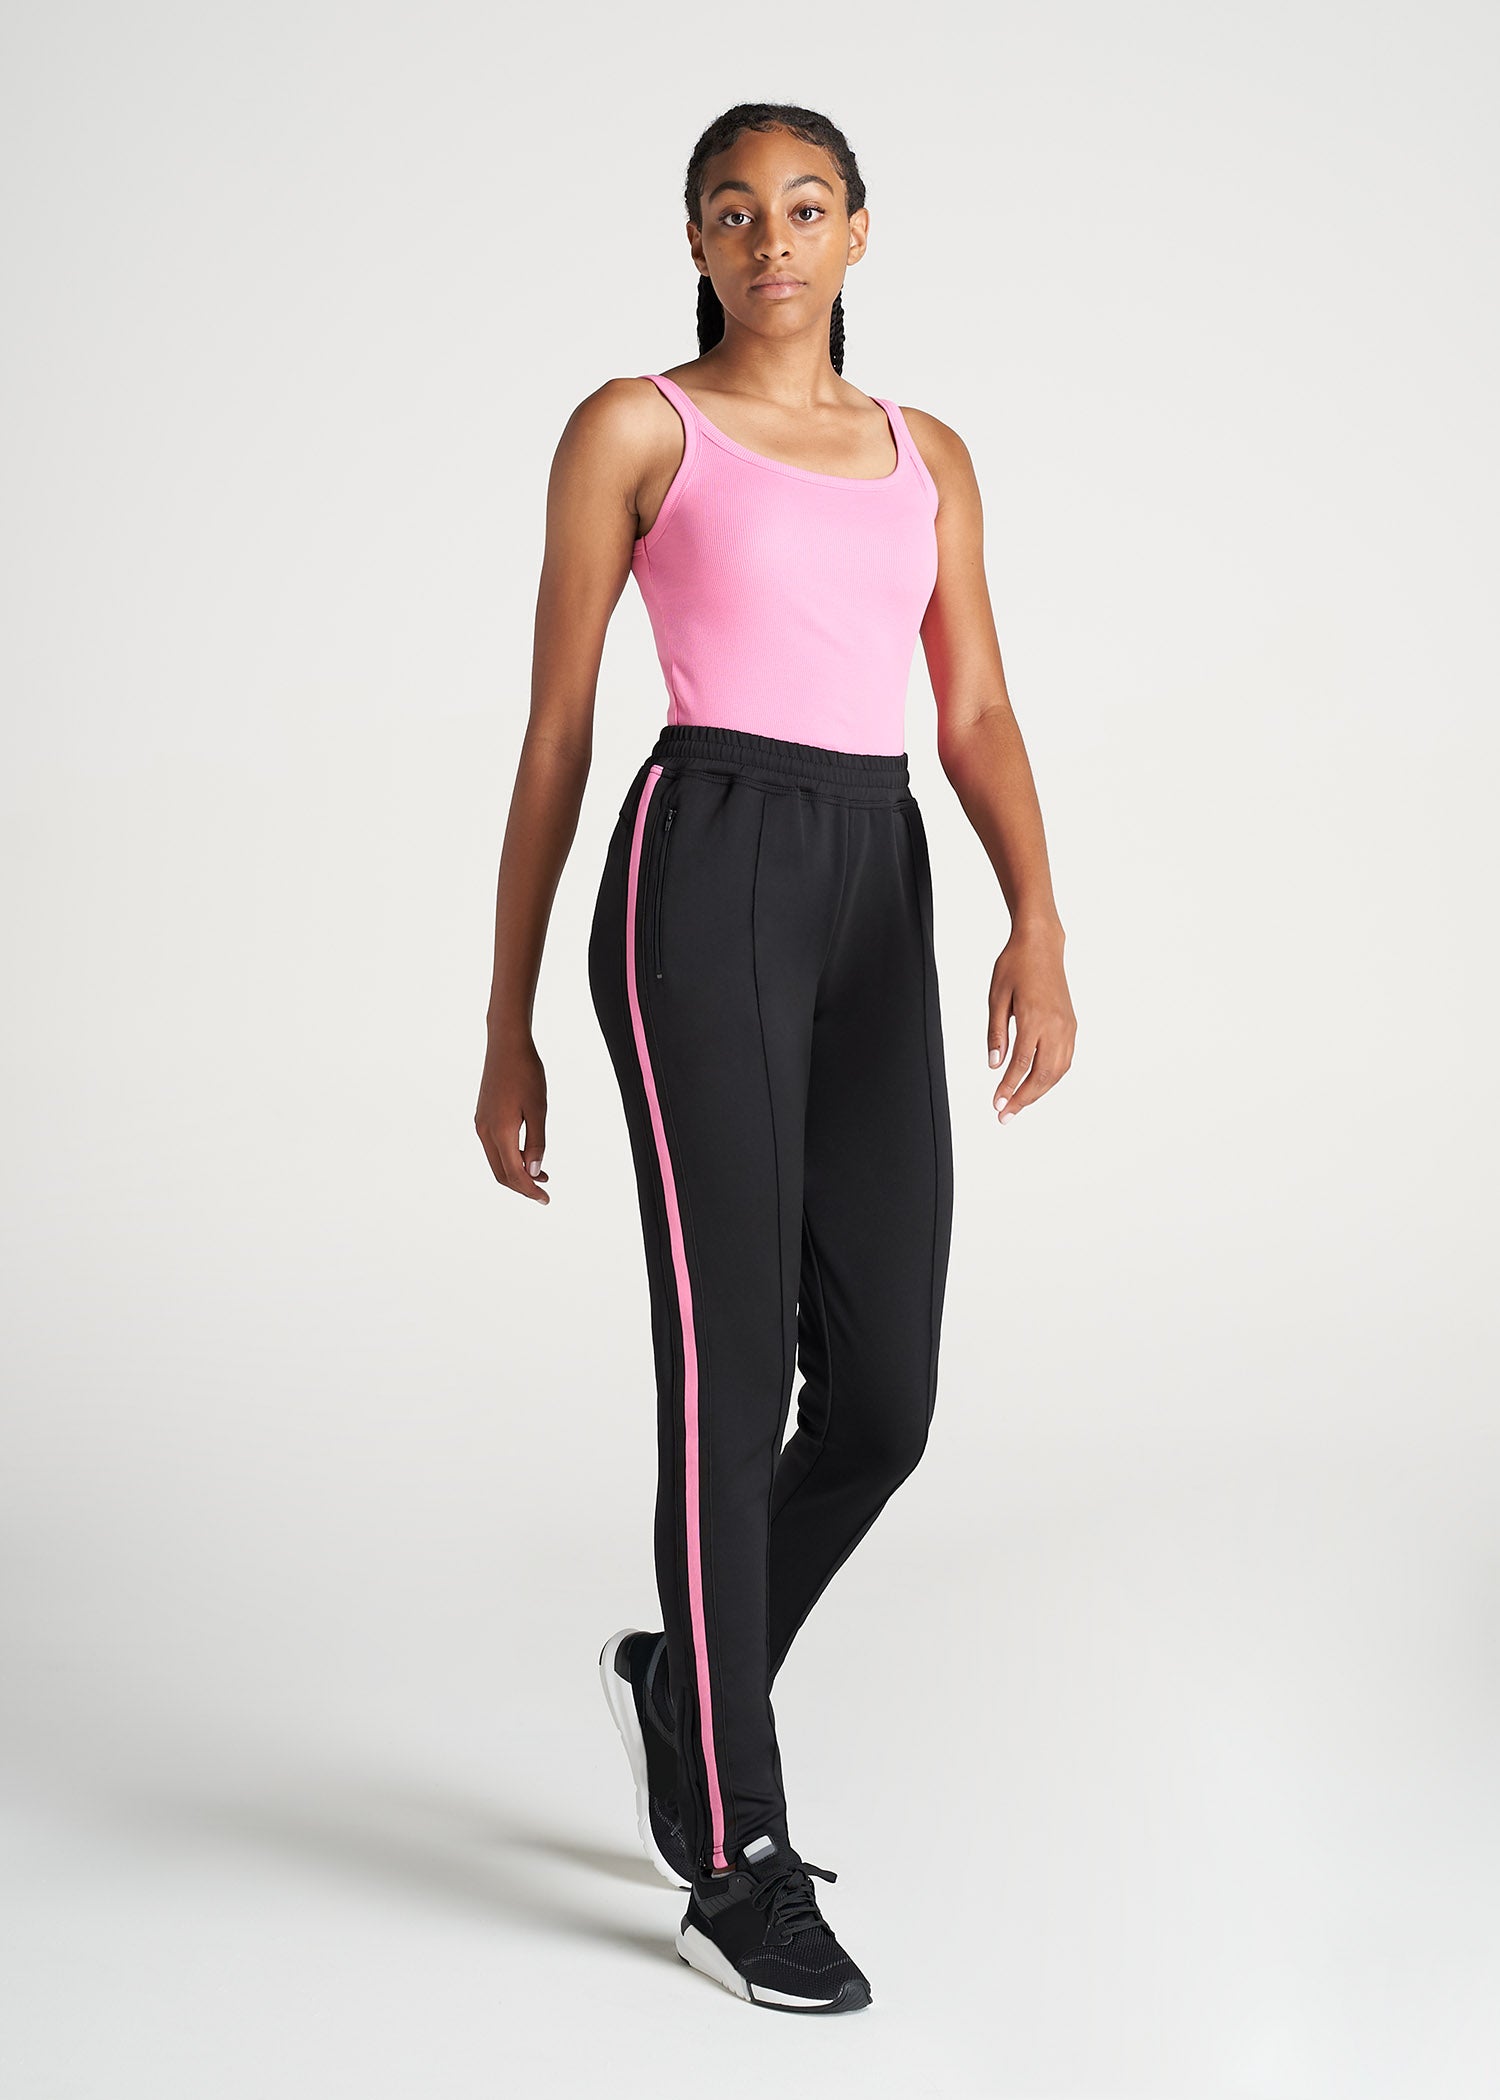 Polyester Spandex Womens Activewear Track Pants